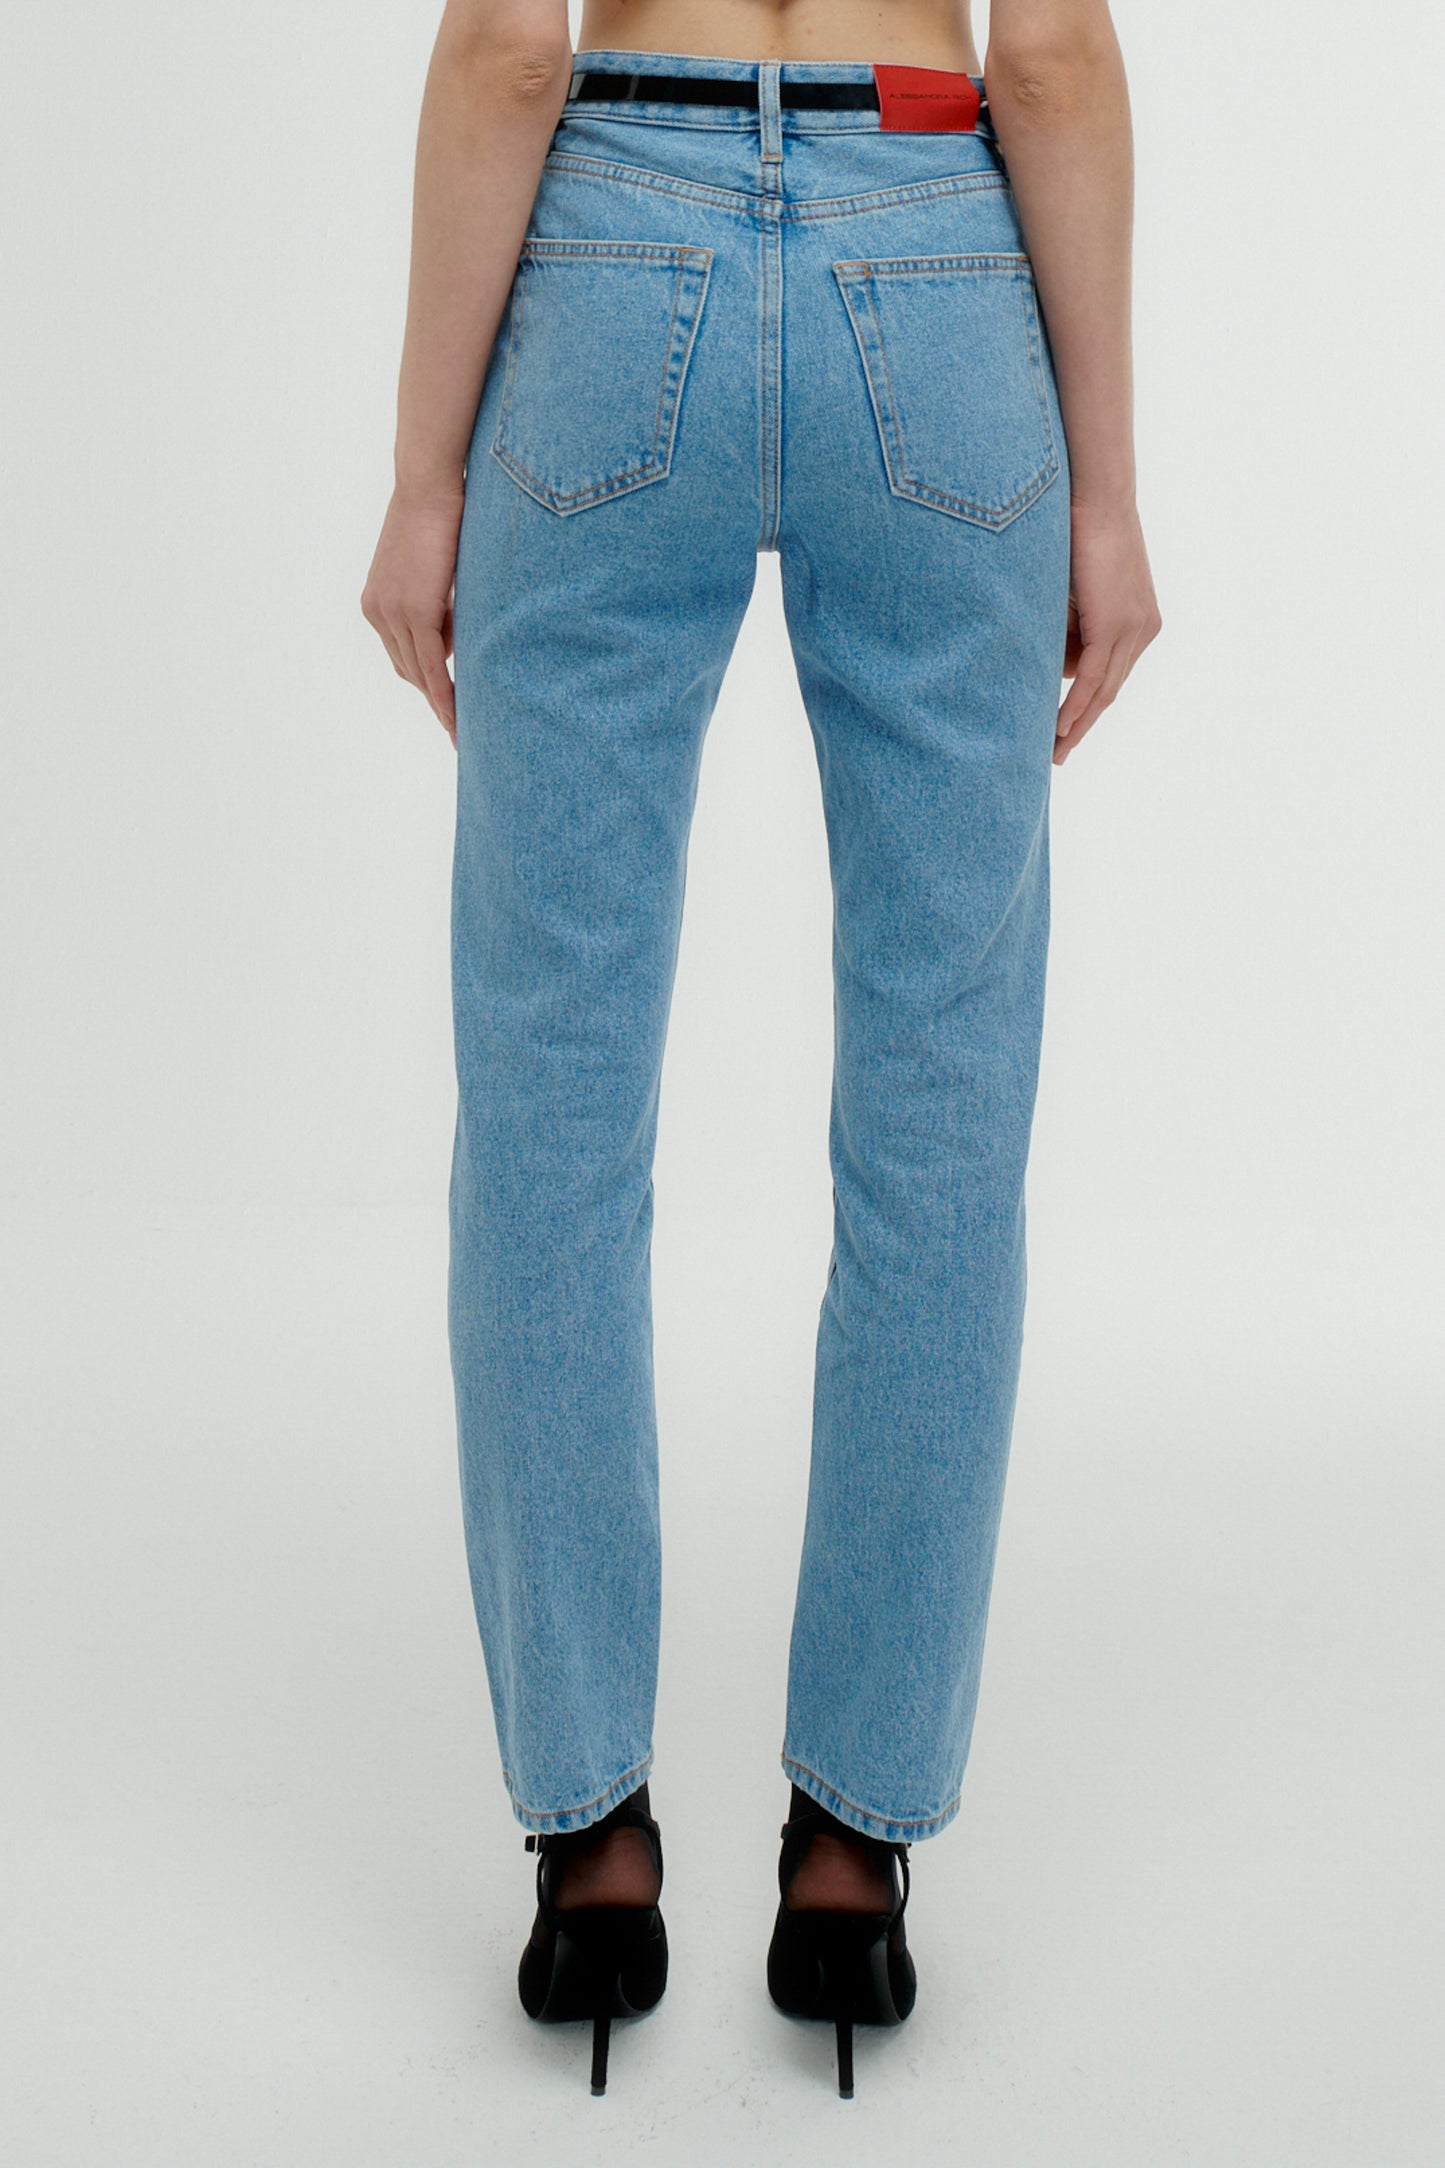 STRAIGHT DENIM JEANS WITH CRYSTAL EMBELLISHMENT